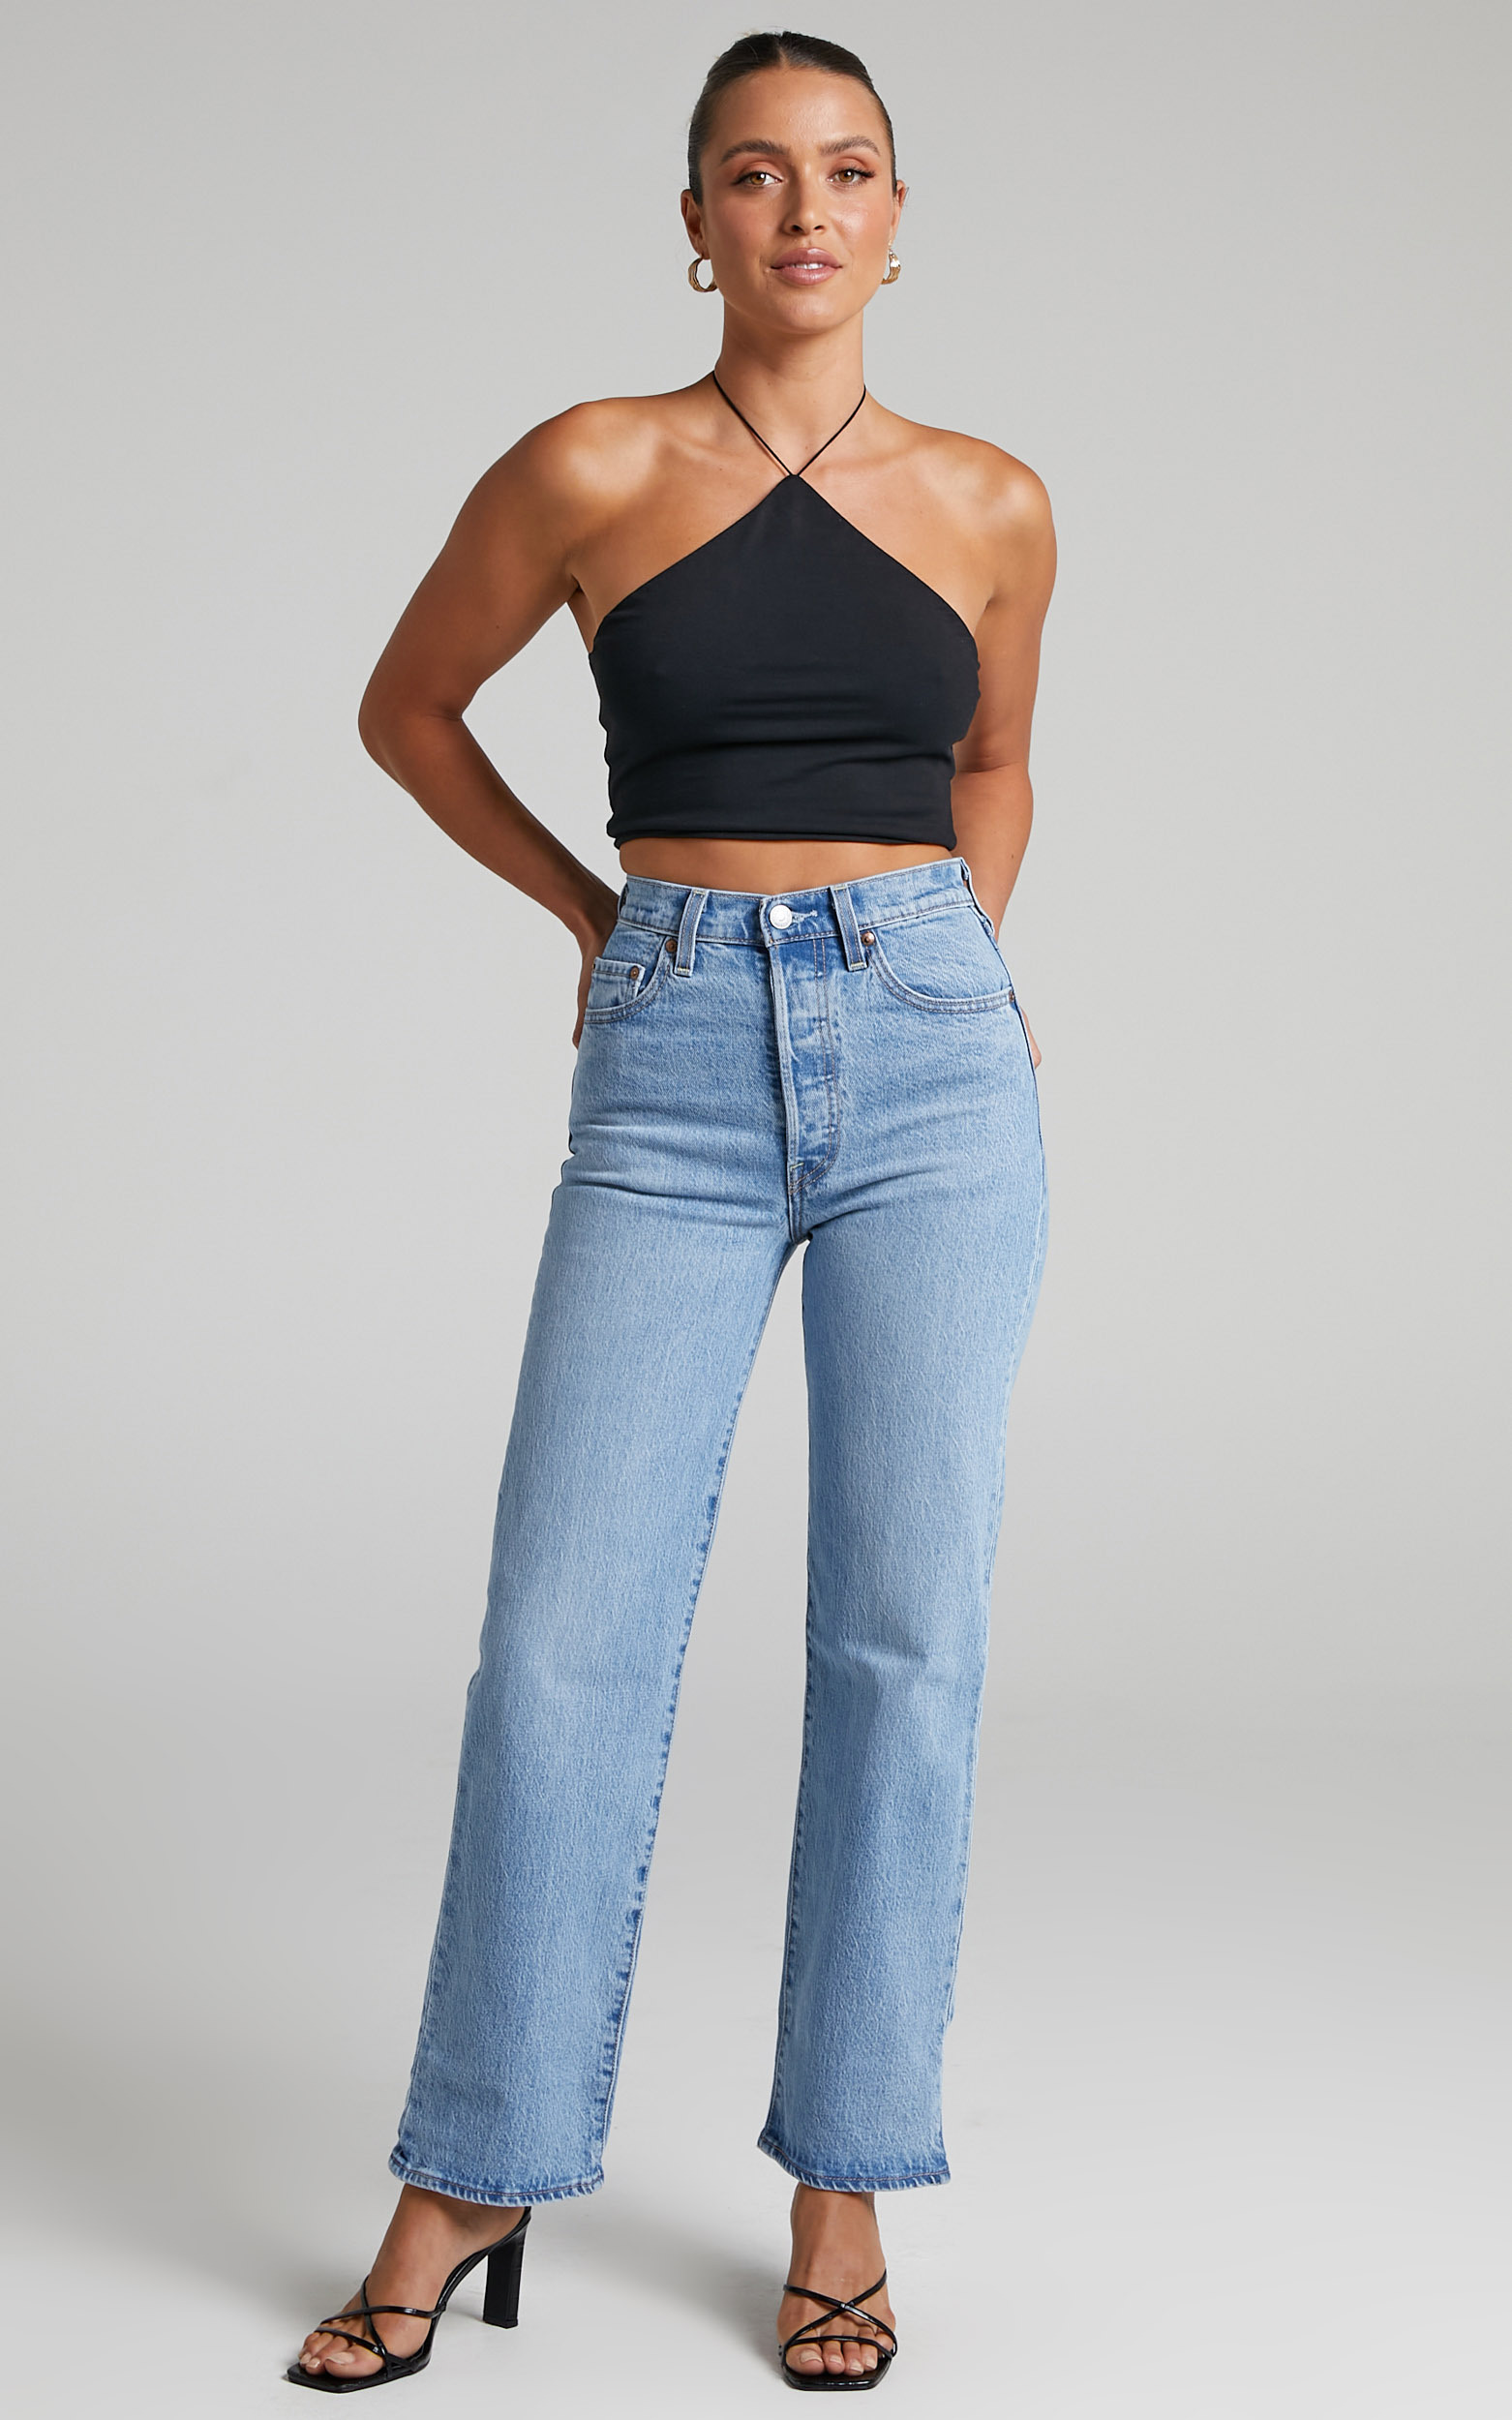 Levi's - Ribcage Straight Jean in Tango Gossip - 06, BLU1, hi-res image number null